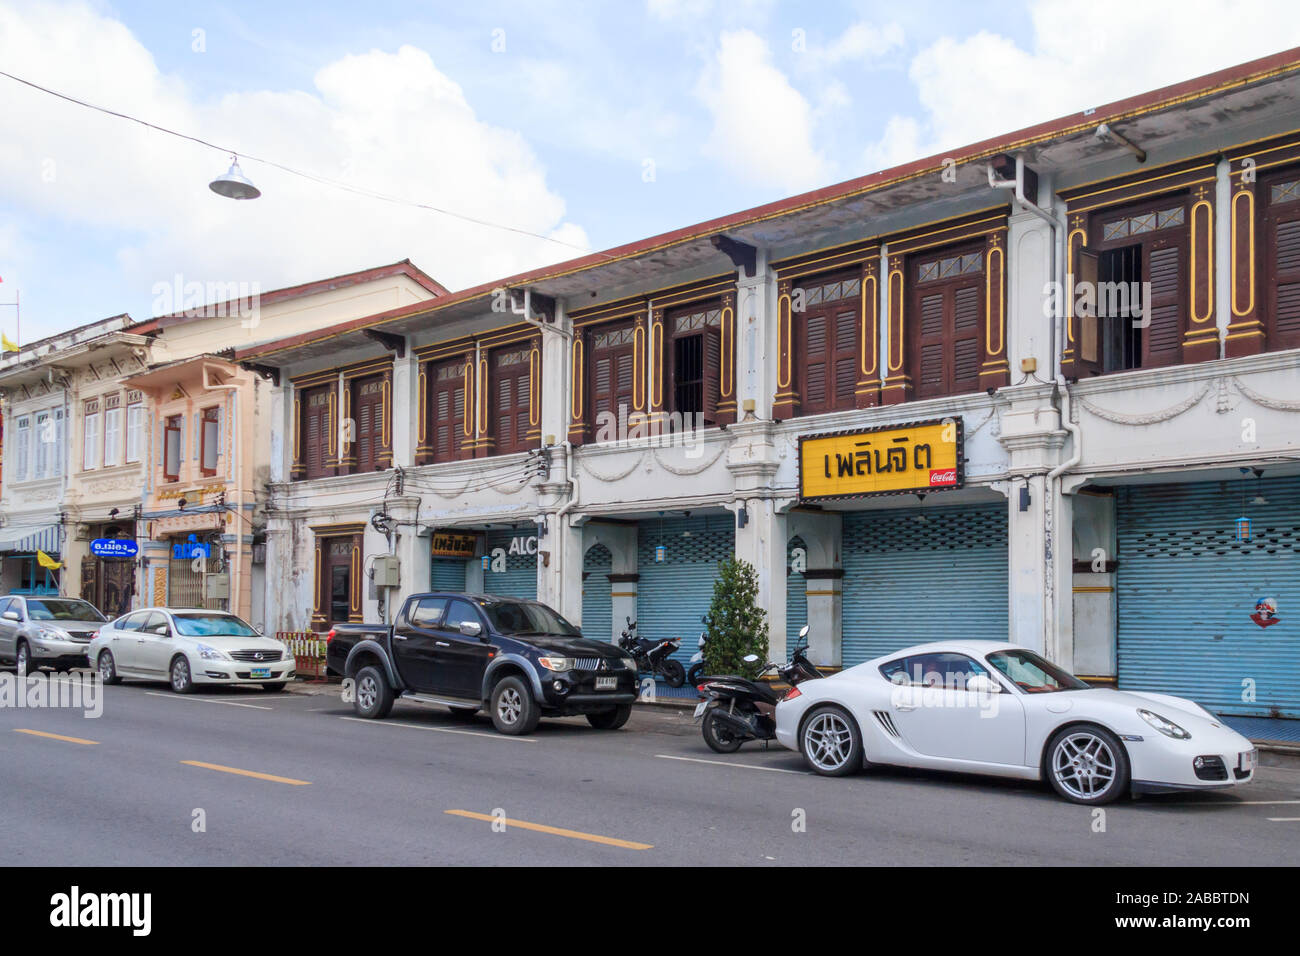 Phuket, Thailand - September 4th 2013: Cars parked outside Sino Portuguese architecture houses on Dibuk Road.  This is the heart of the Old Town. Stock Photo